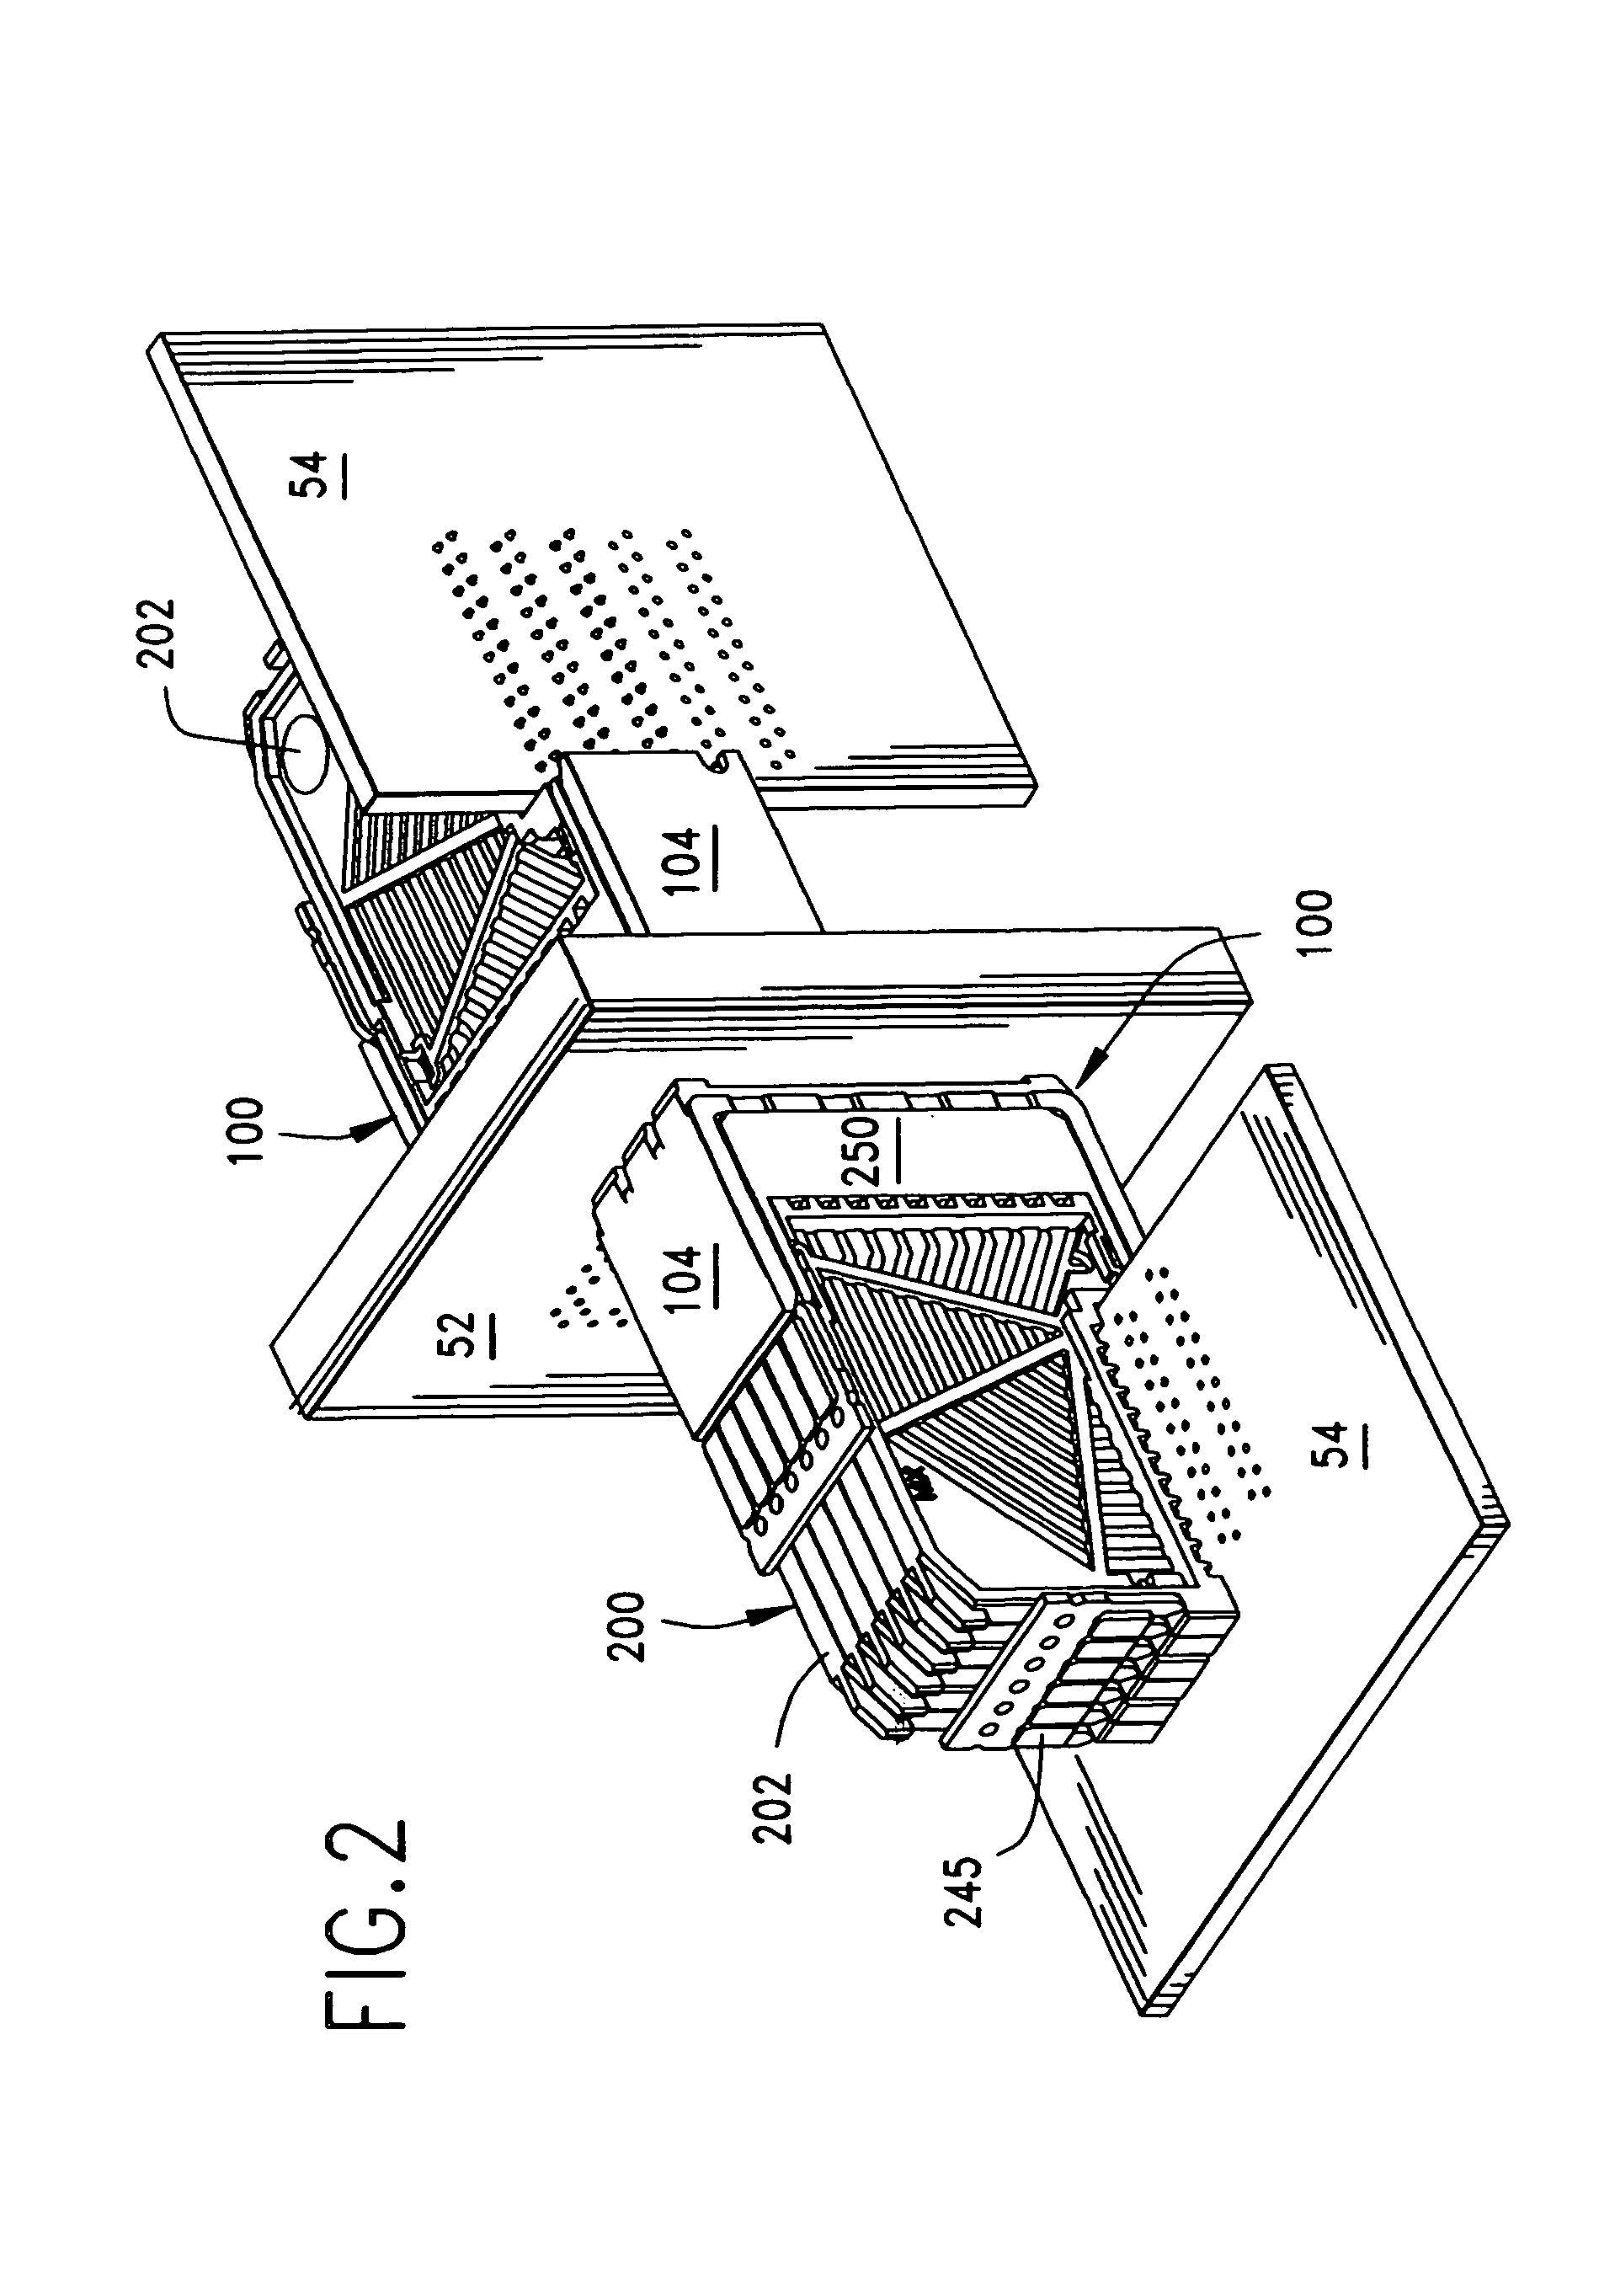 High-density, robust connector with castellations